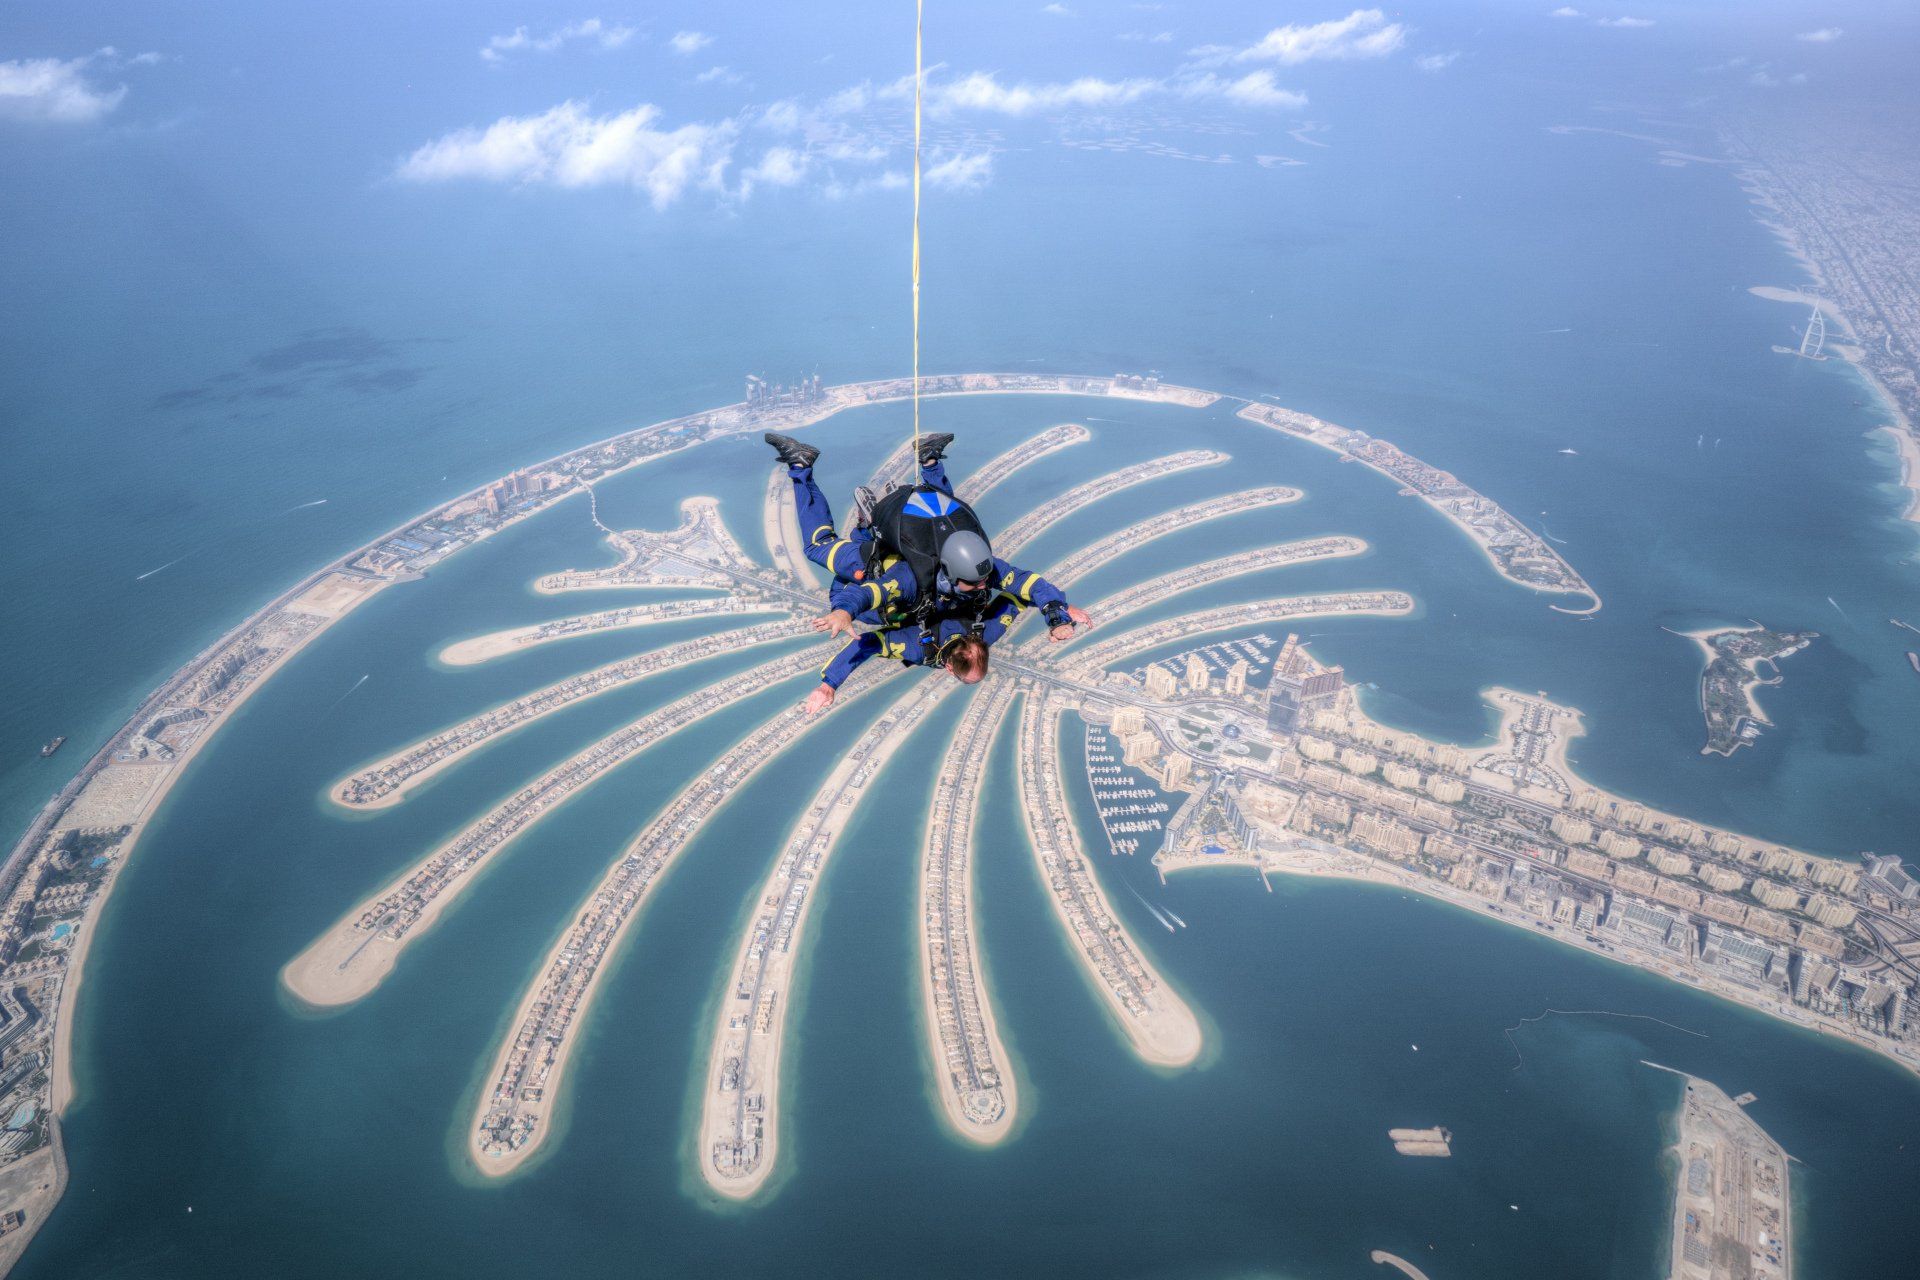 
Fastest time to tandem skydive all seven continents: James C. Wigginton and Thomas J. Noonan lll set world record